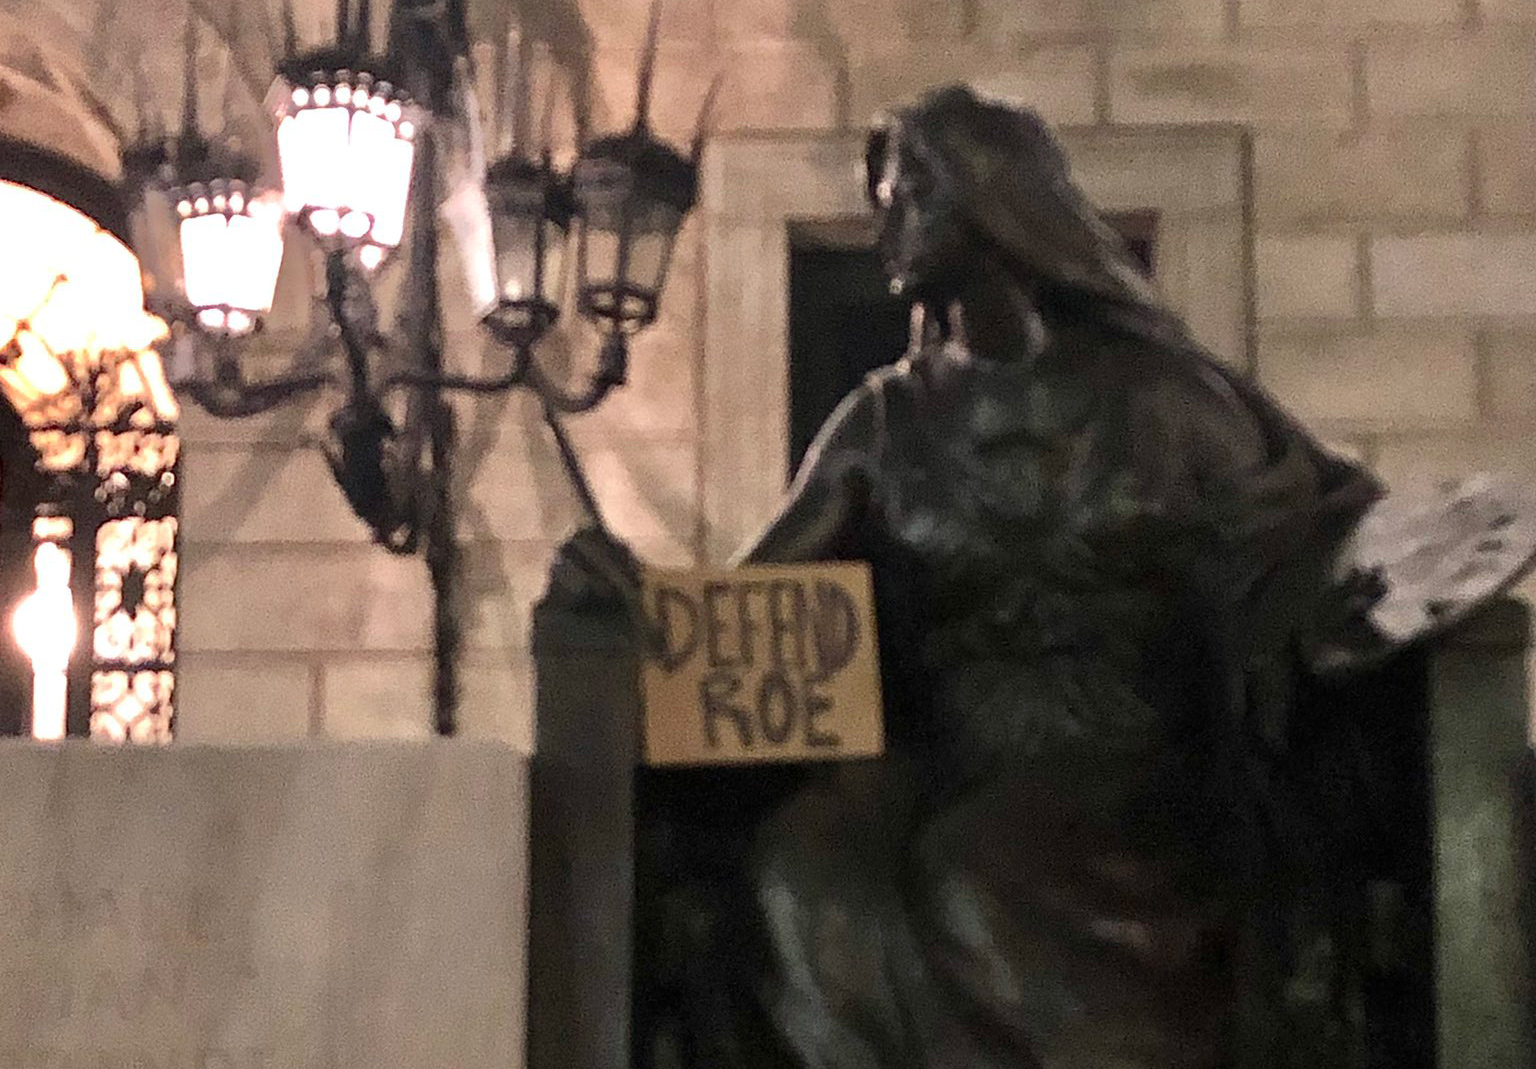 Statue of Art holding a sign reading: Defend Roe